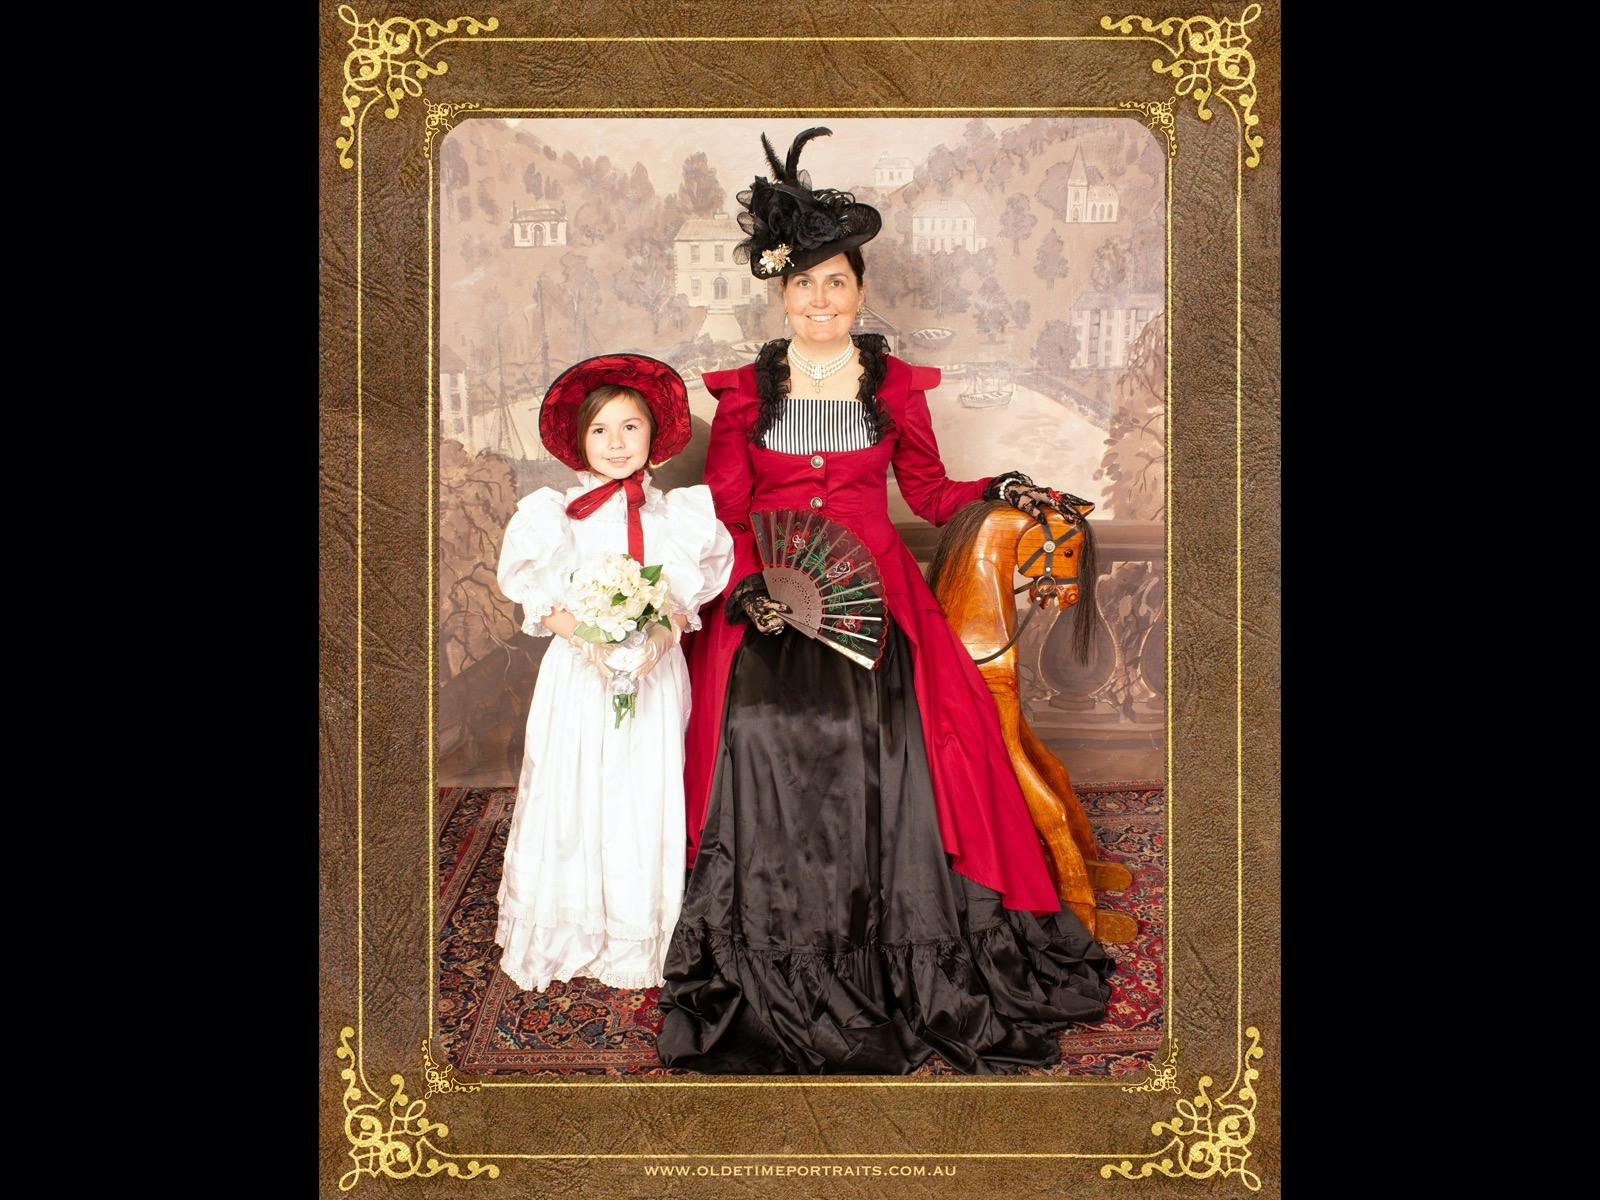 Dress in colonial victorian costumes to create a portrait